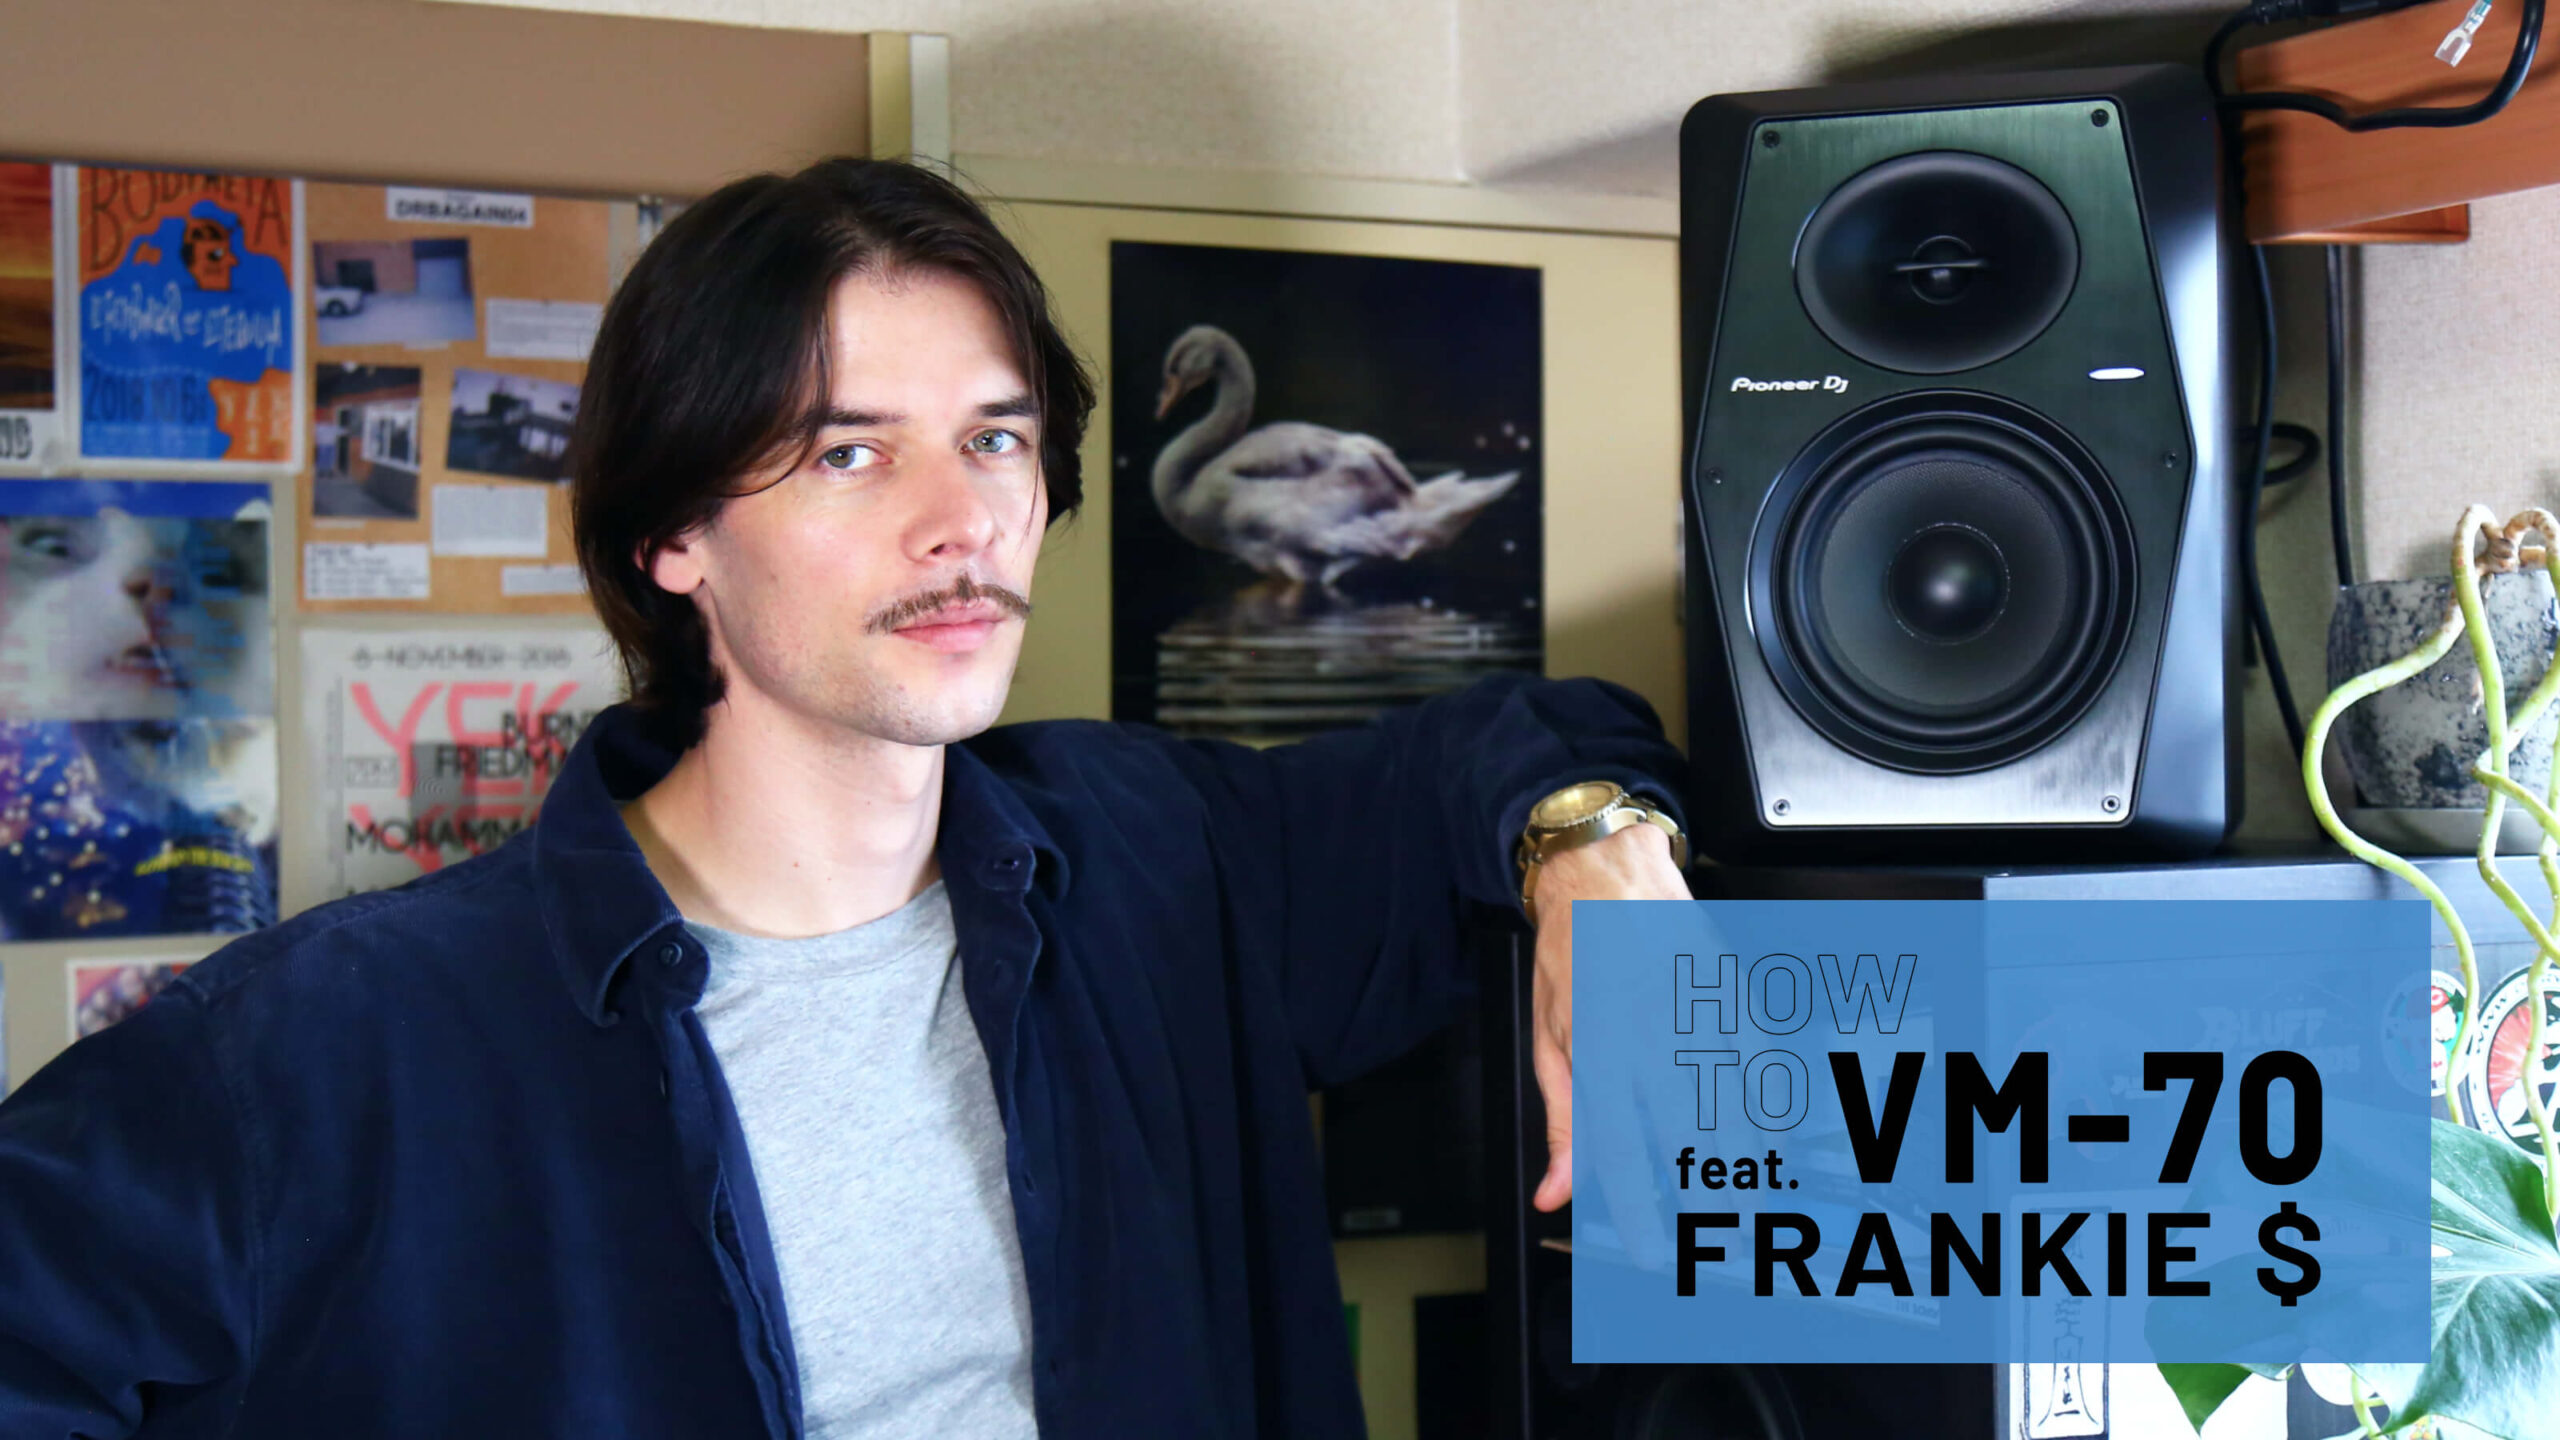 HOW TO VM-70 feat. Frankie $